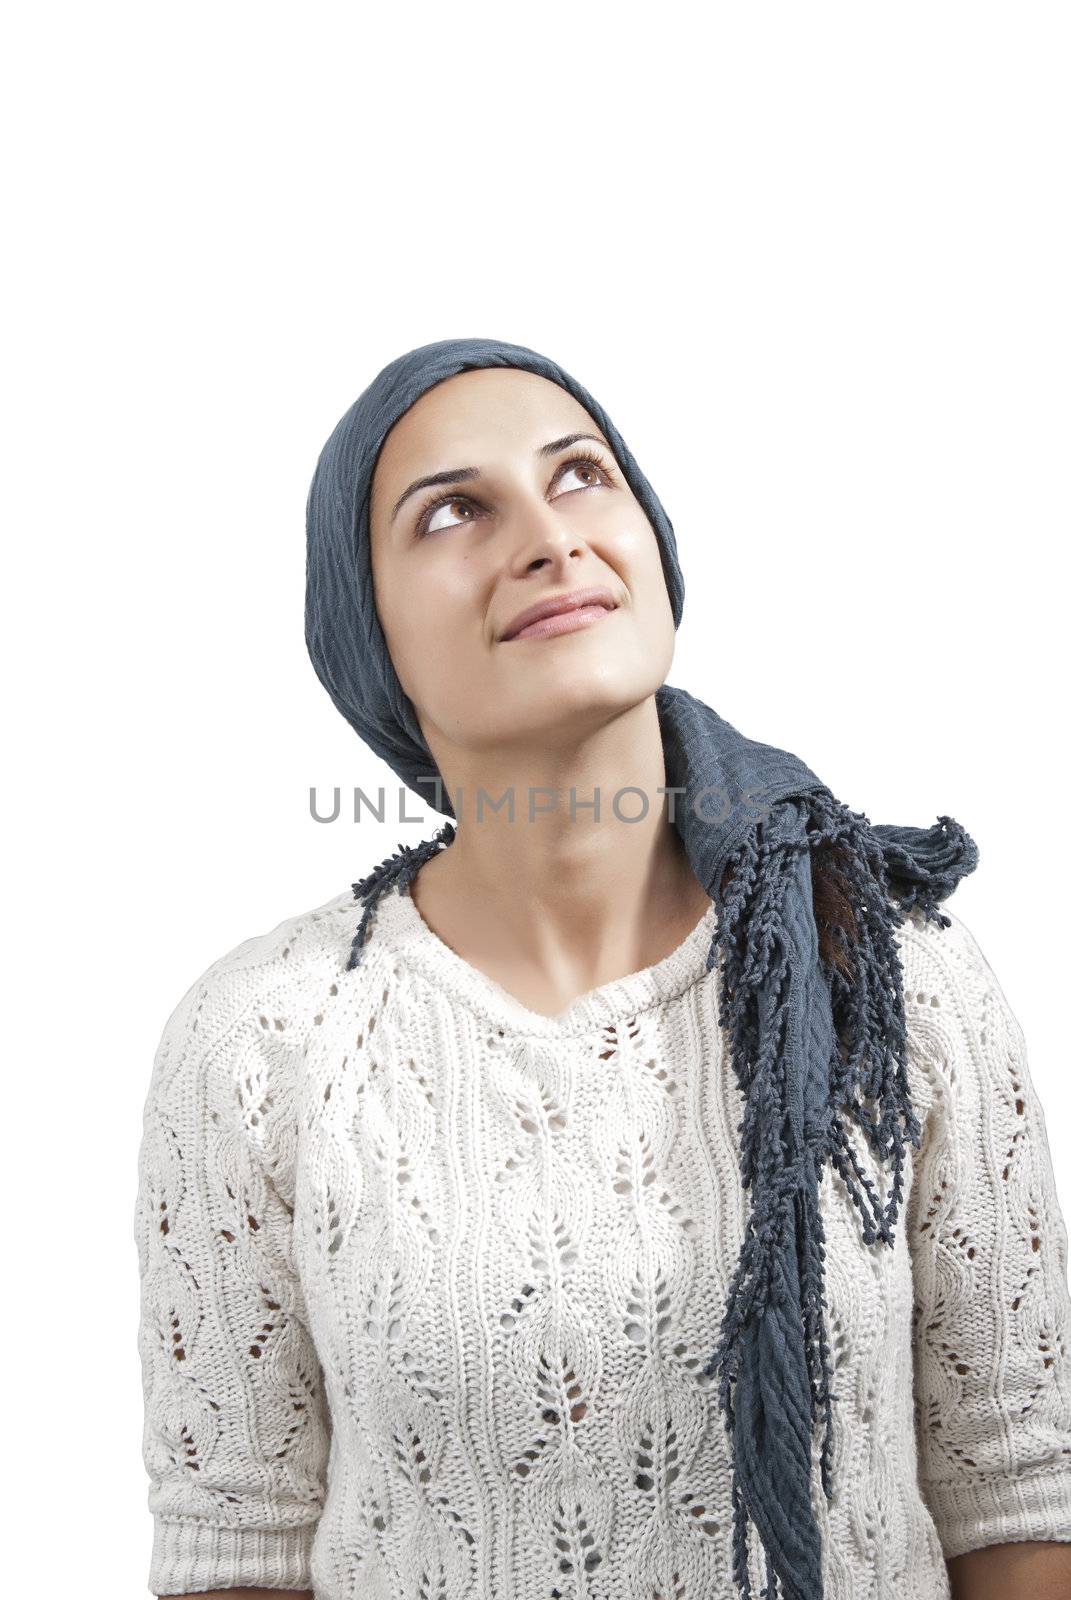 Female with Blue Veil Smile